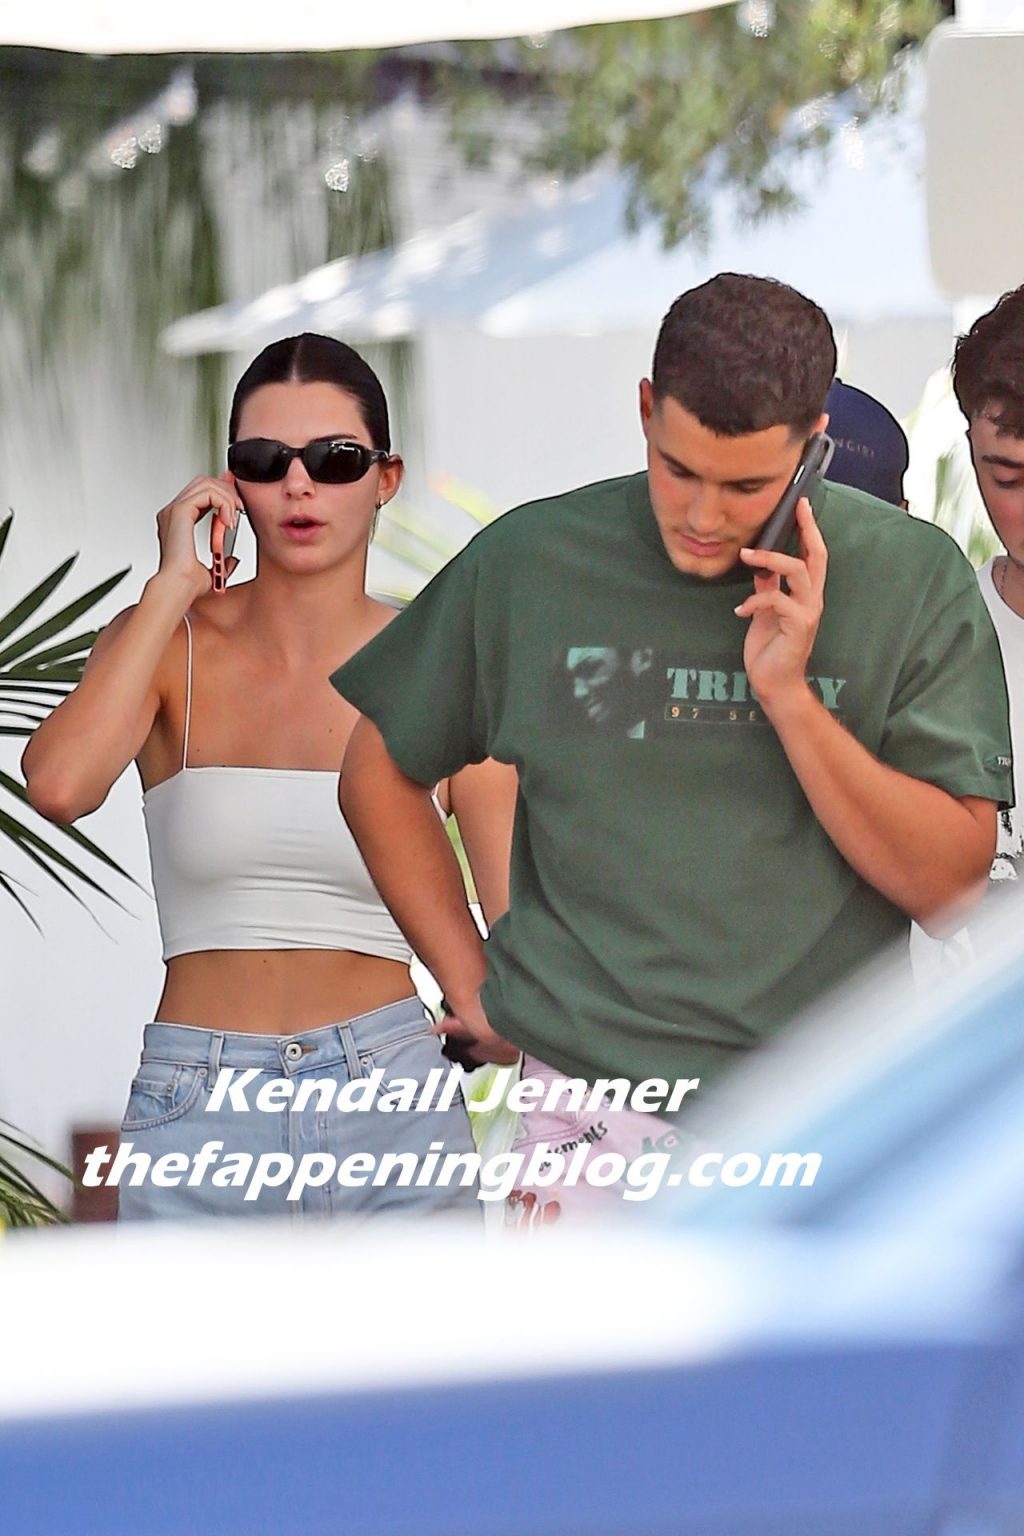 Kendall Jenner Books Out 40 Love for Phoenix Suns Game Viewing Party with Pals (40 Photos)